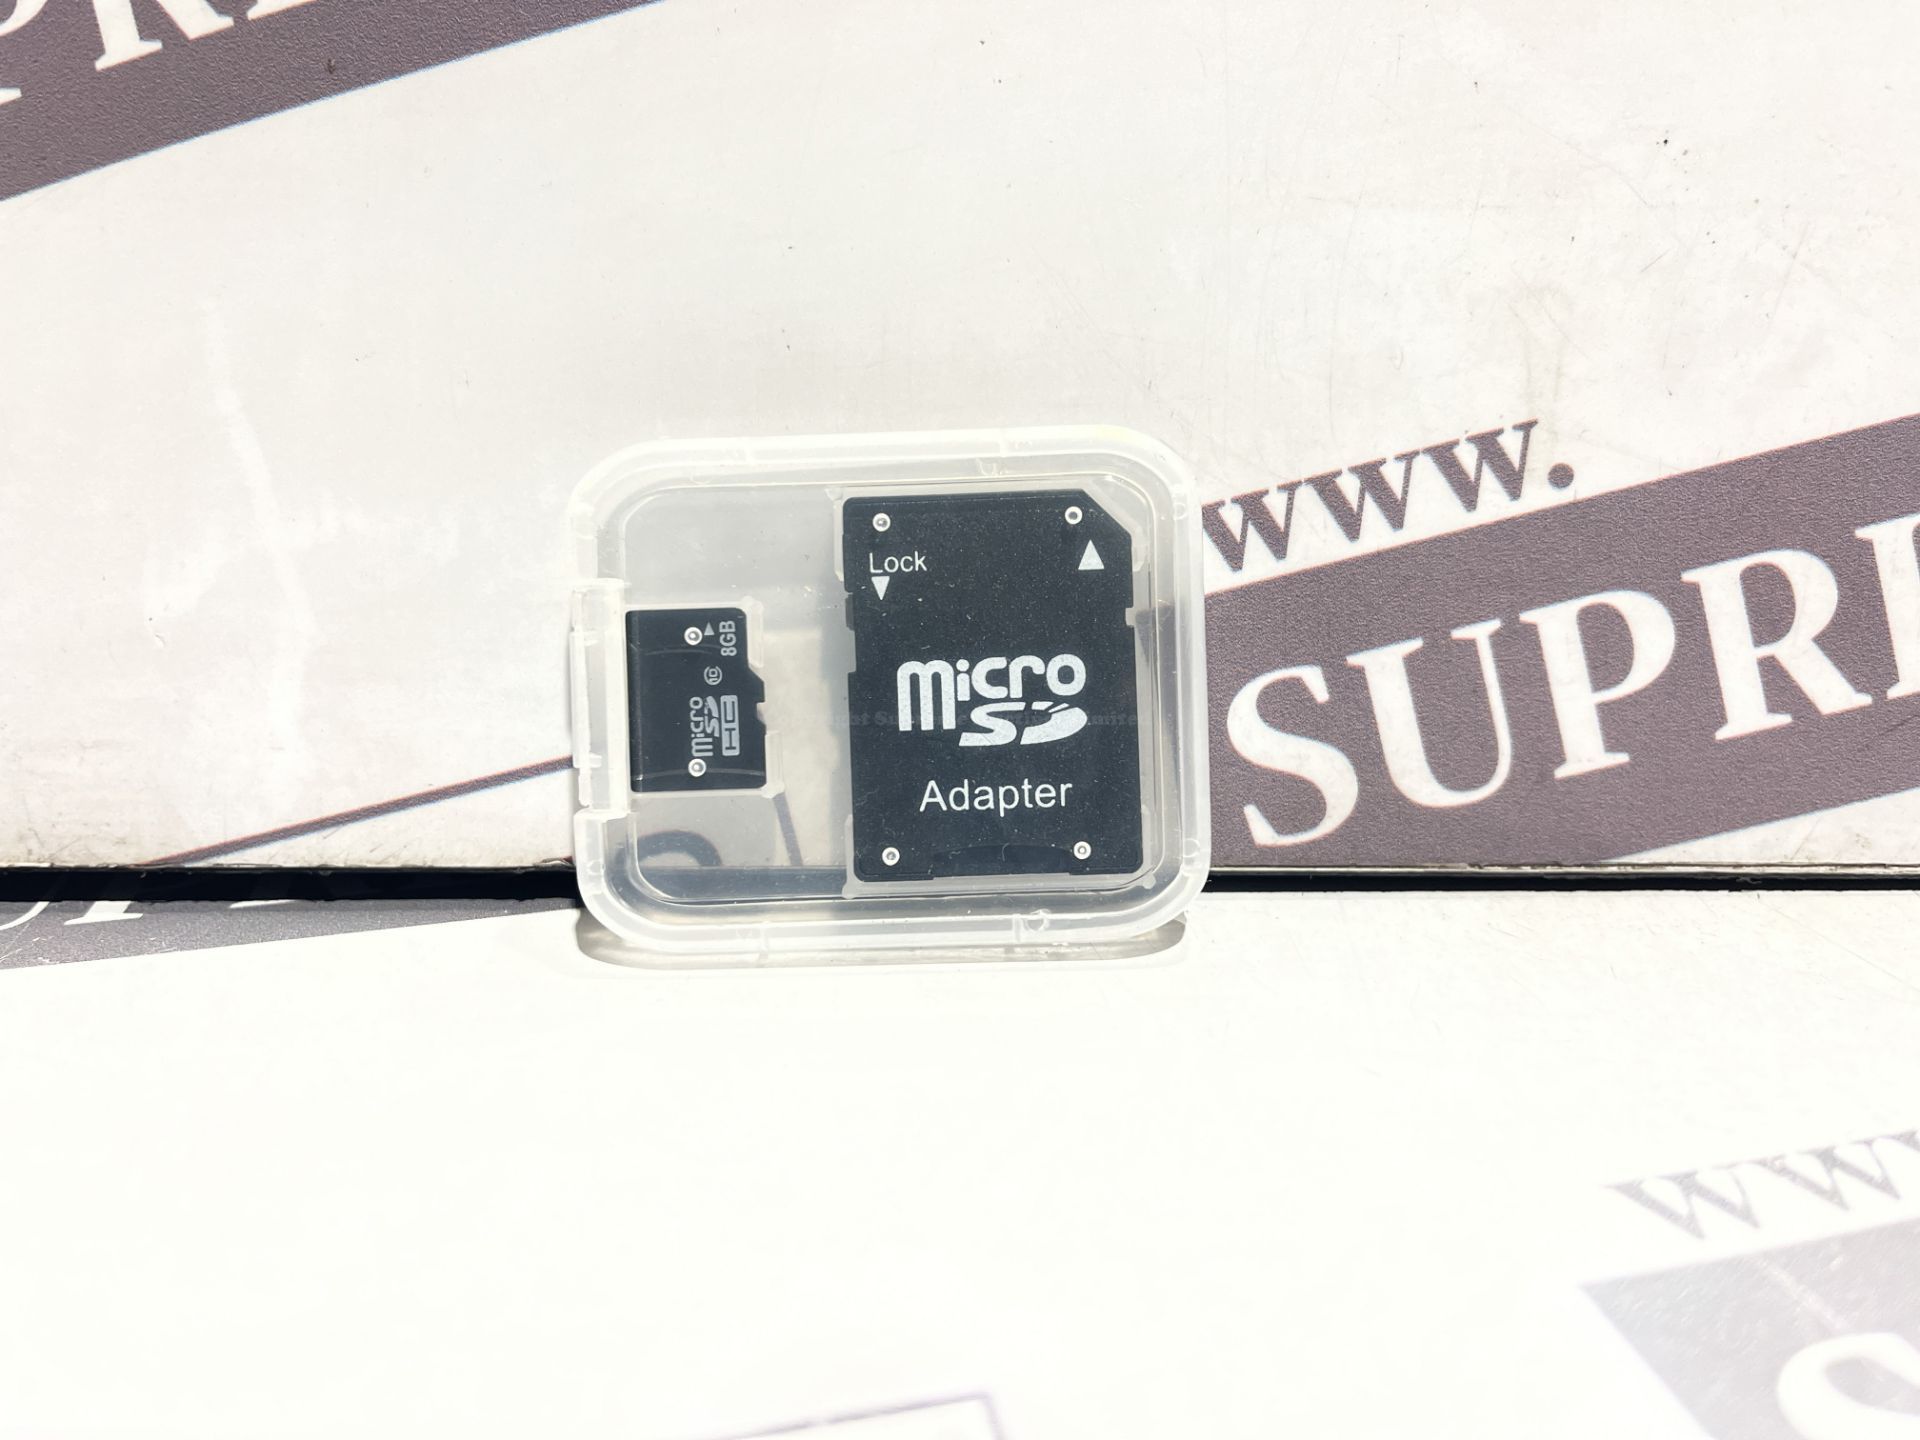 10 X BRAND NEW MICRO DISK 8GB MEMORY CARD AND ADAPTER P5